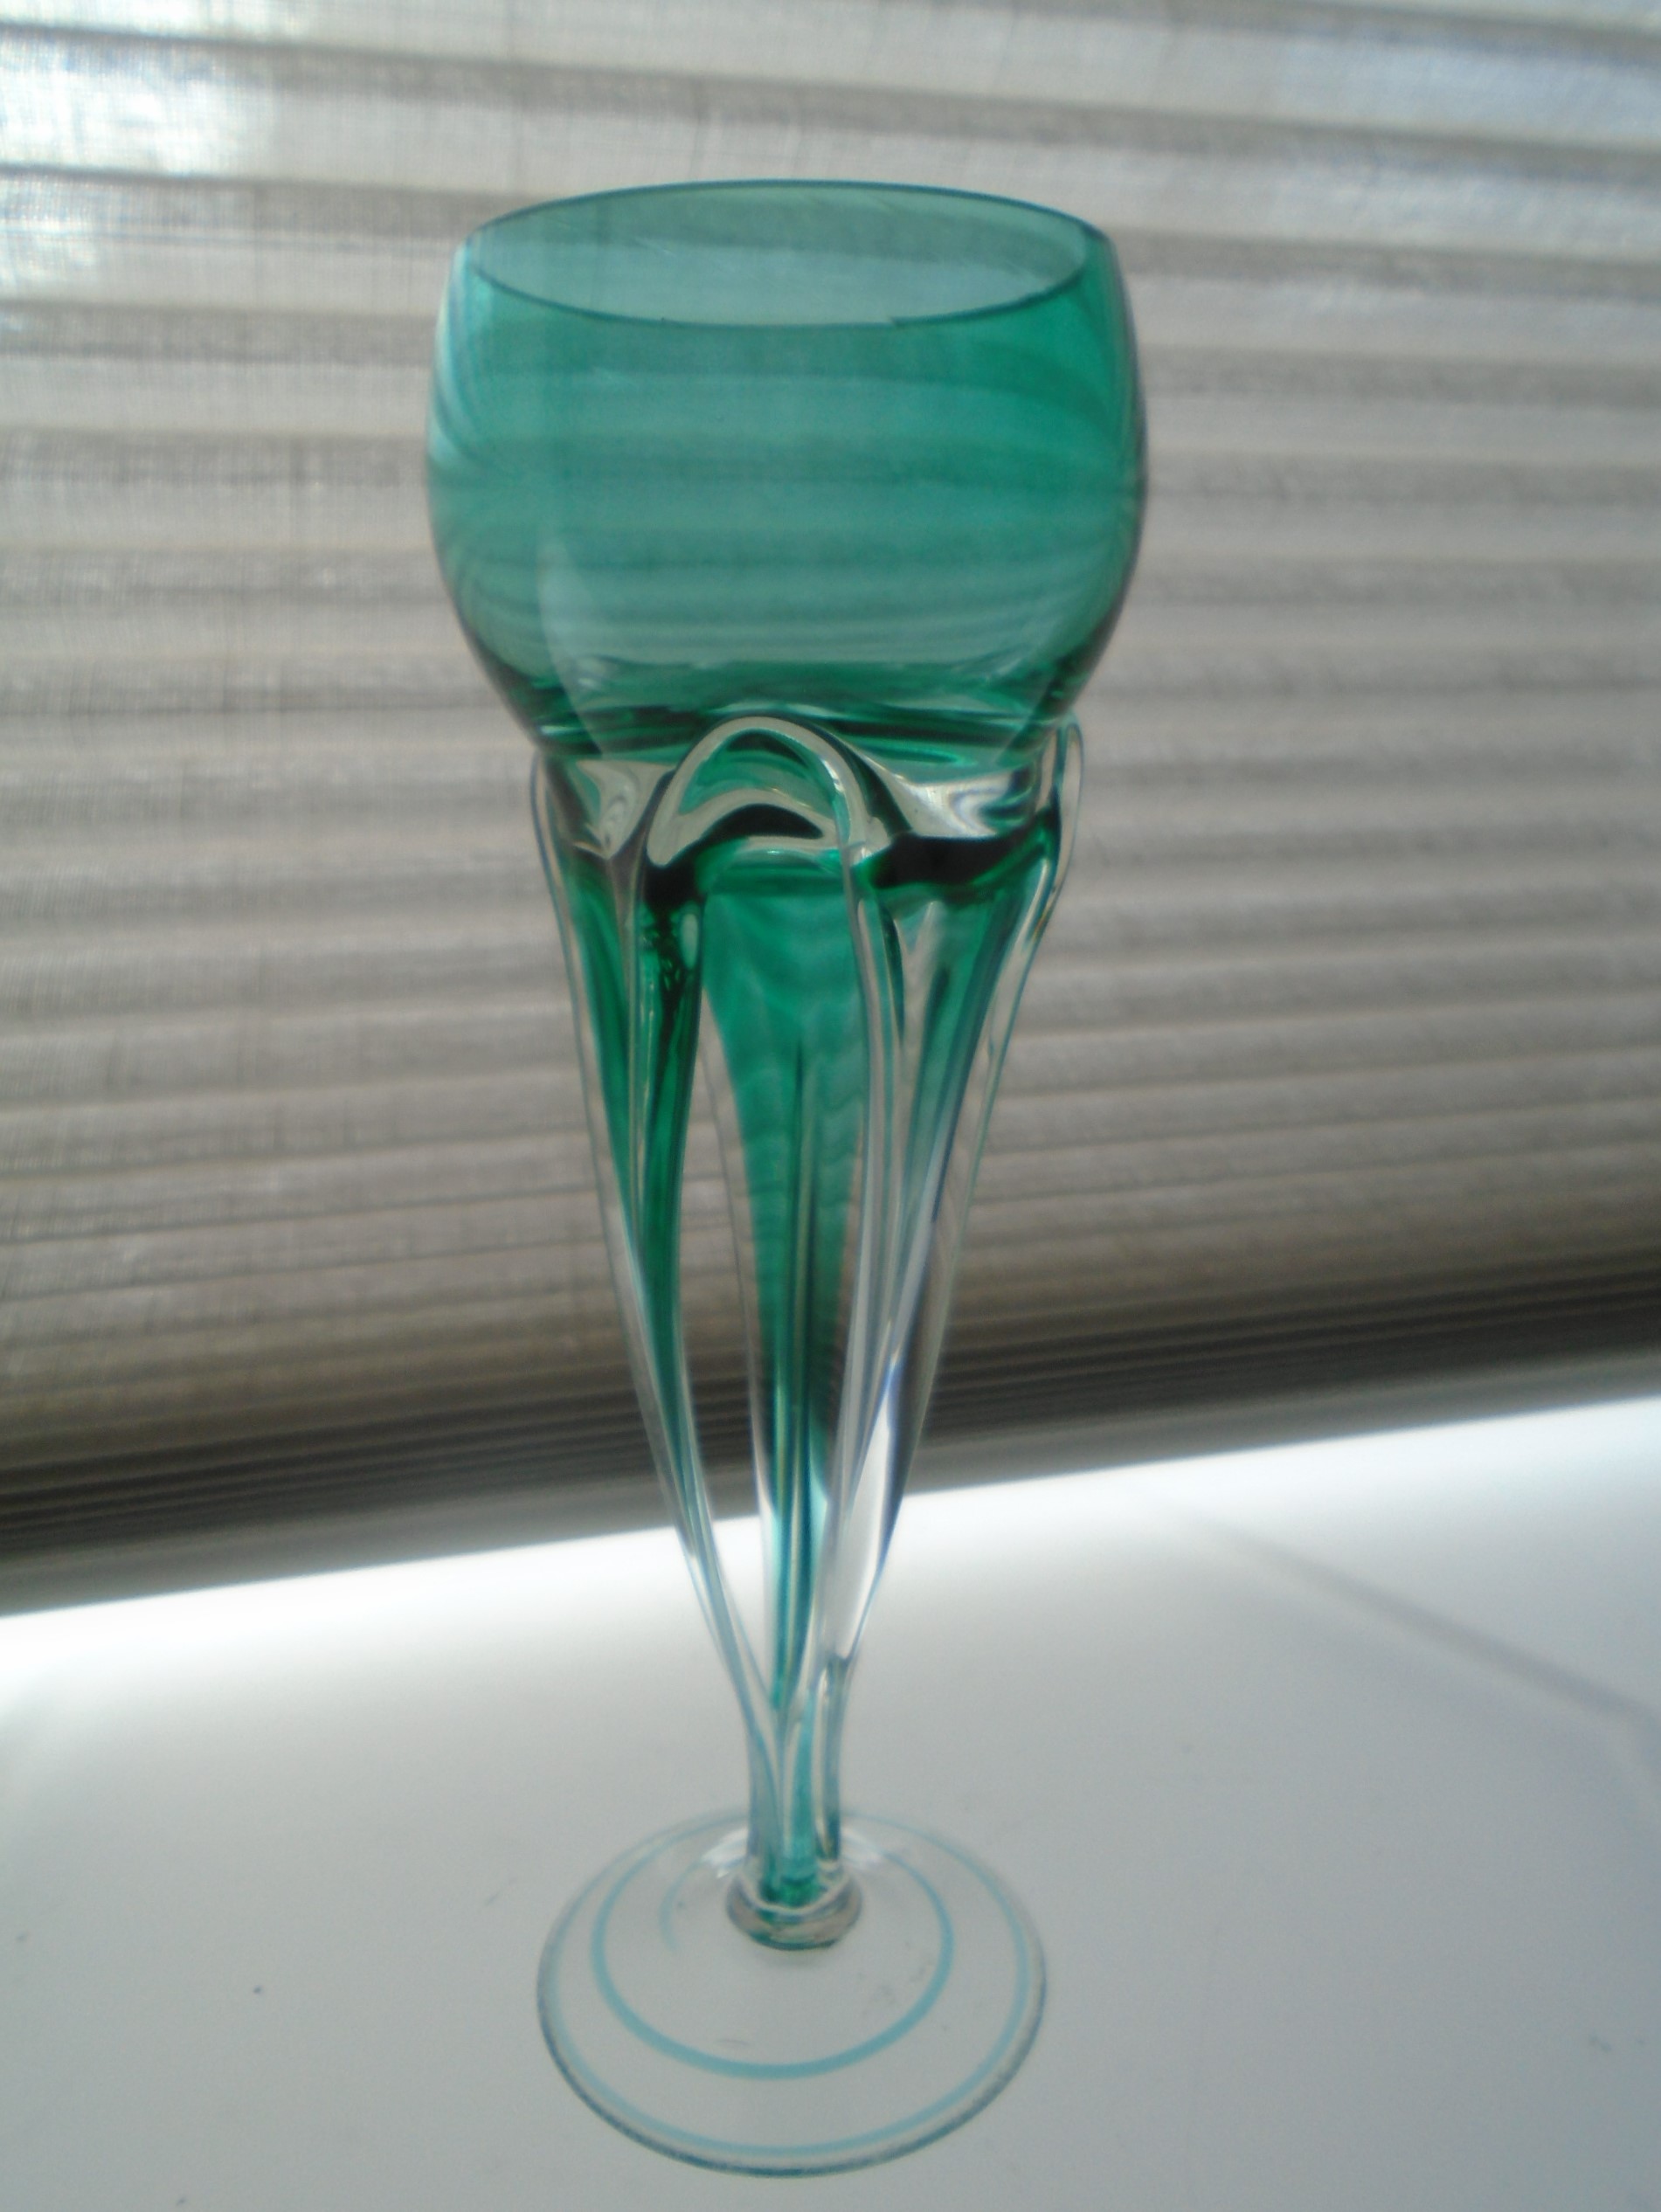 Offered for sale is a nice example of a Jozefina Krosno  Glass tea light holder.